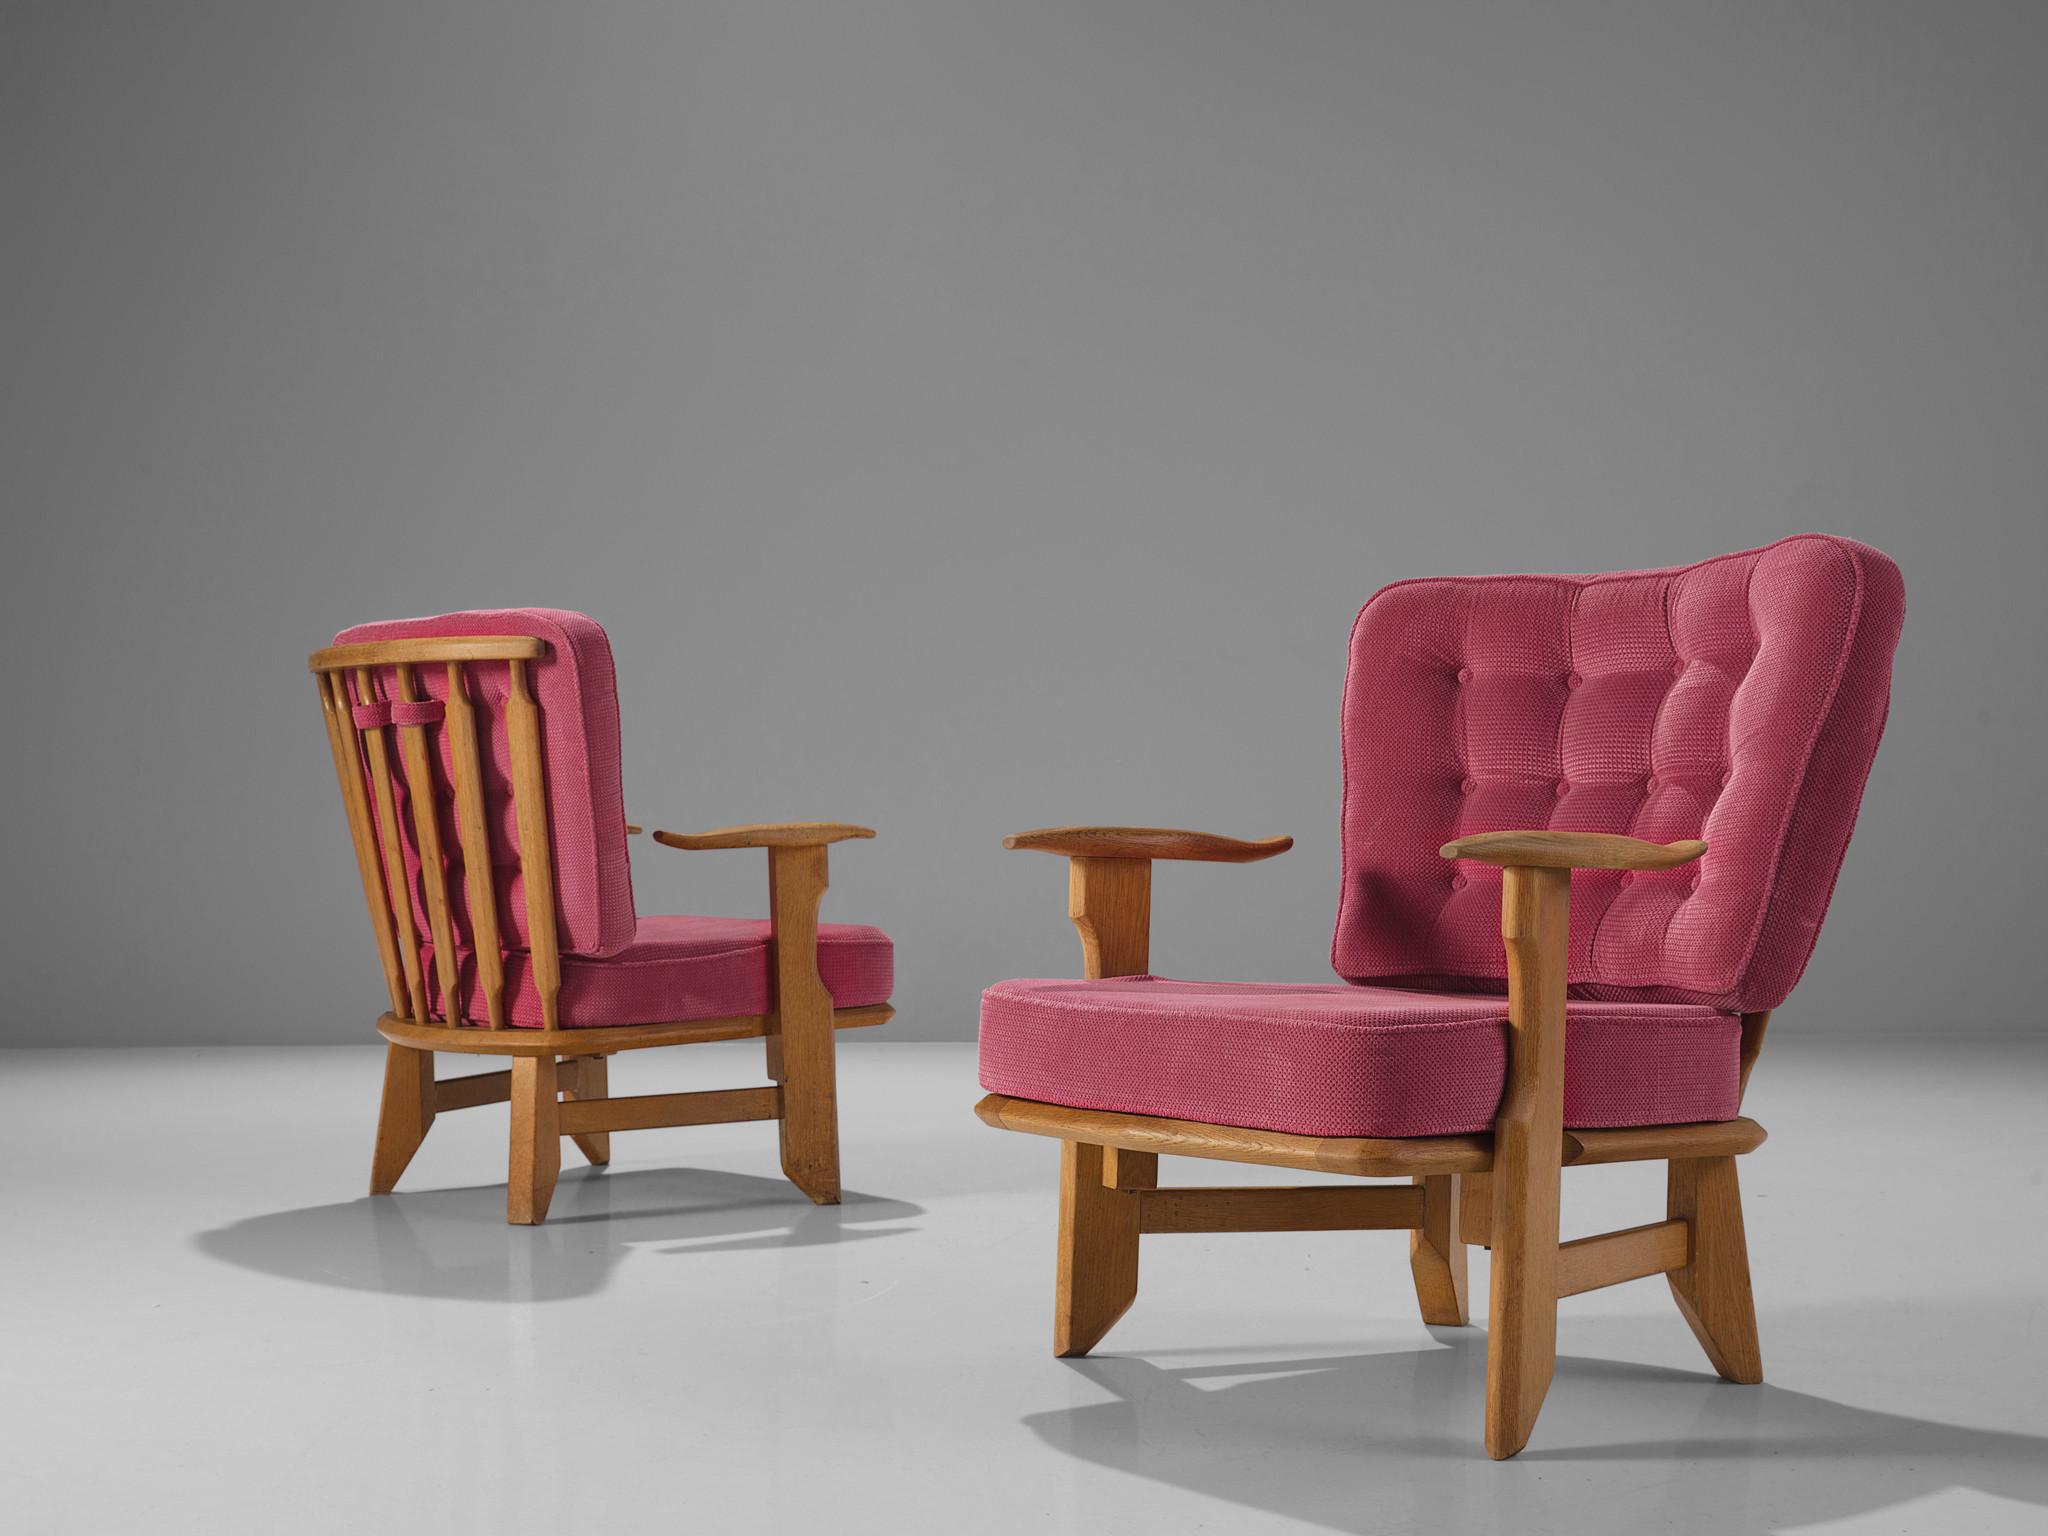 Guillerme et Chambron for Votre Maison, pair of 'Catherine' lounge chairs, pink fabric, oak, France, 1960s

These sculptural easy chairs named ‘Catherine’ are designed by Guillerme et Chambron. They are known for their high quality solid oak